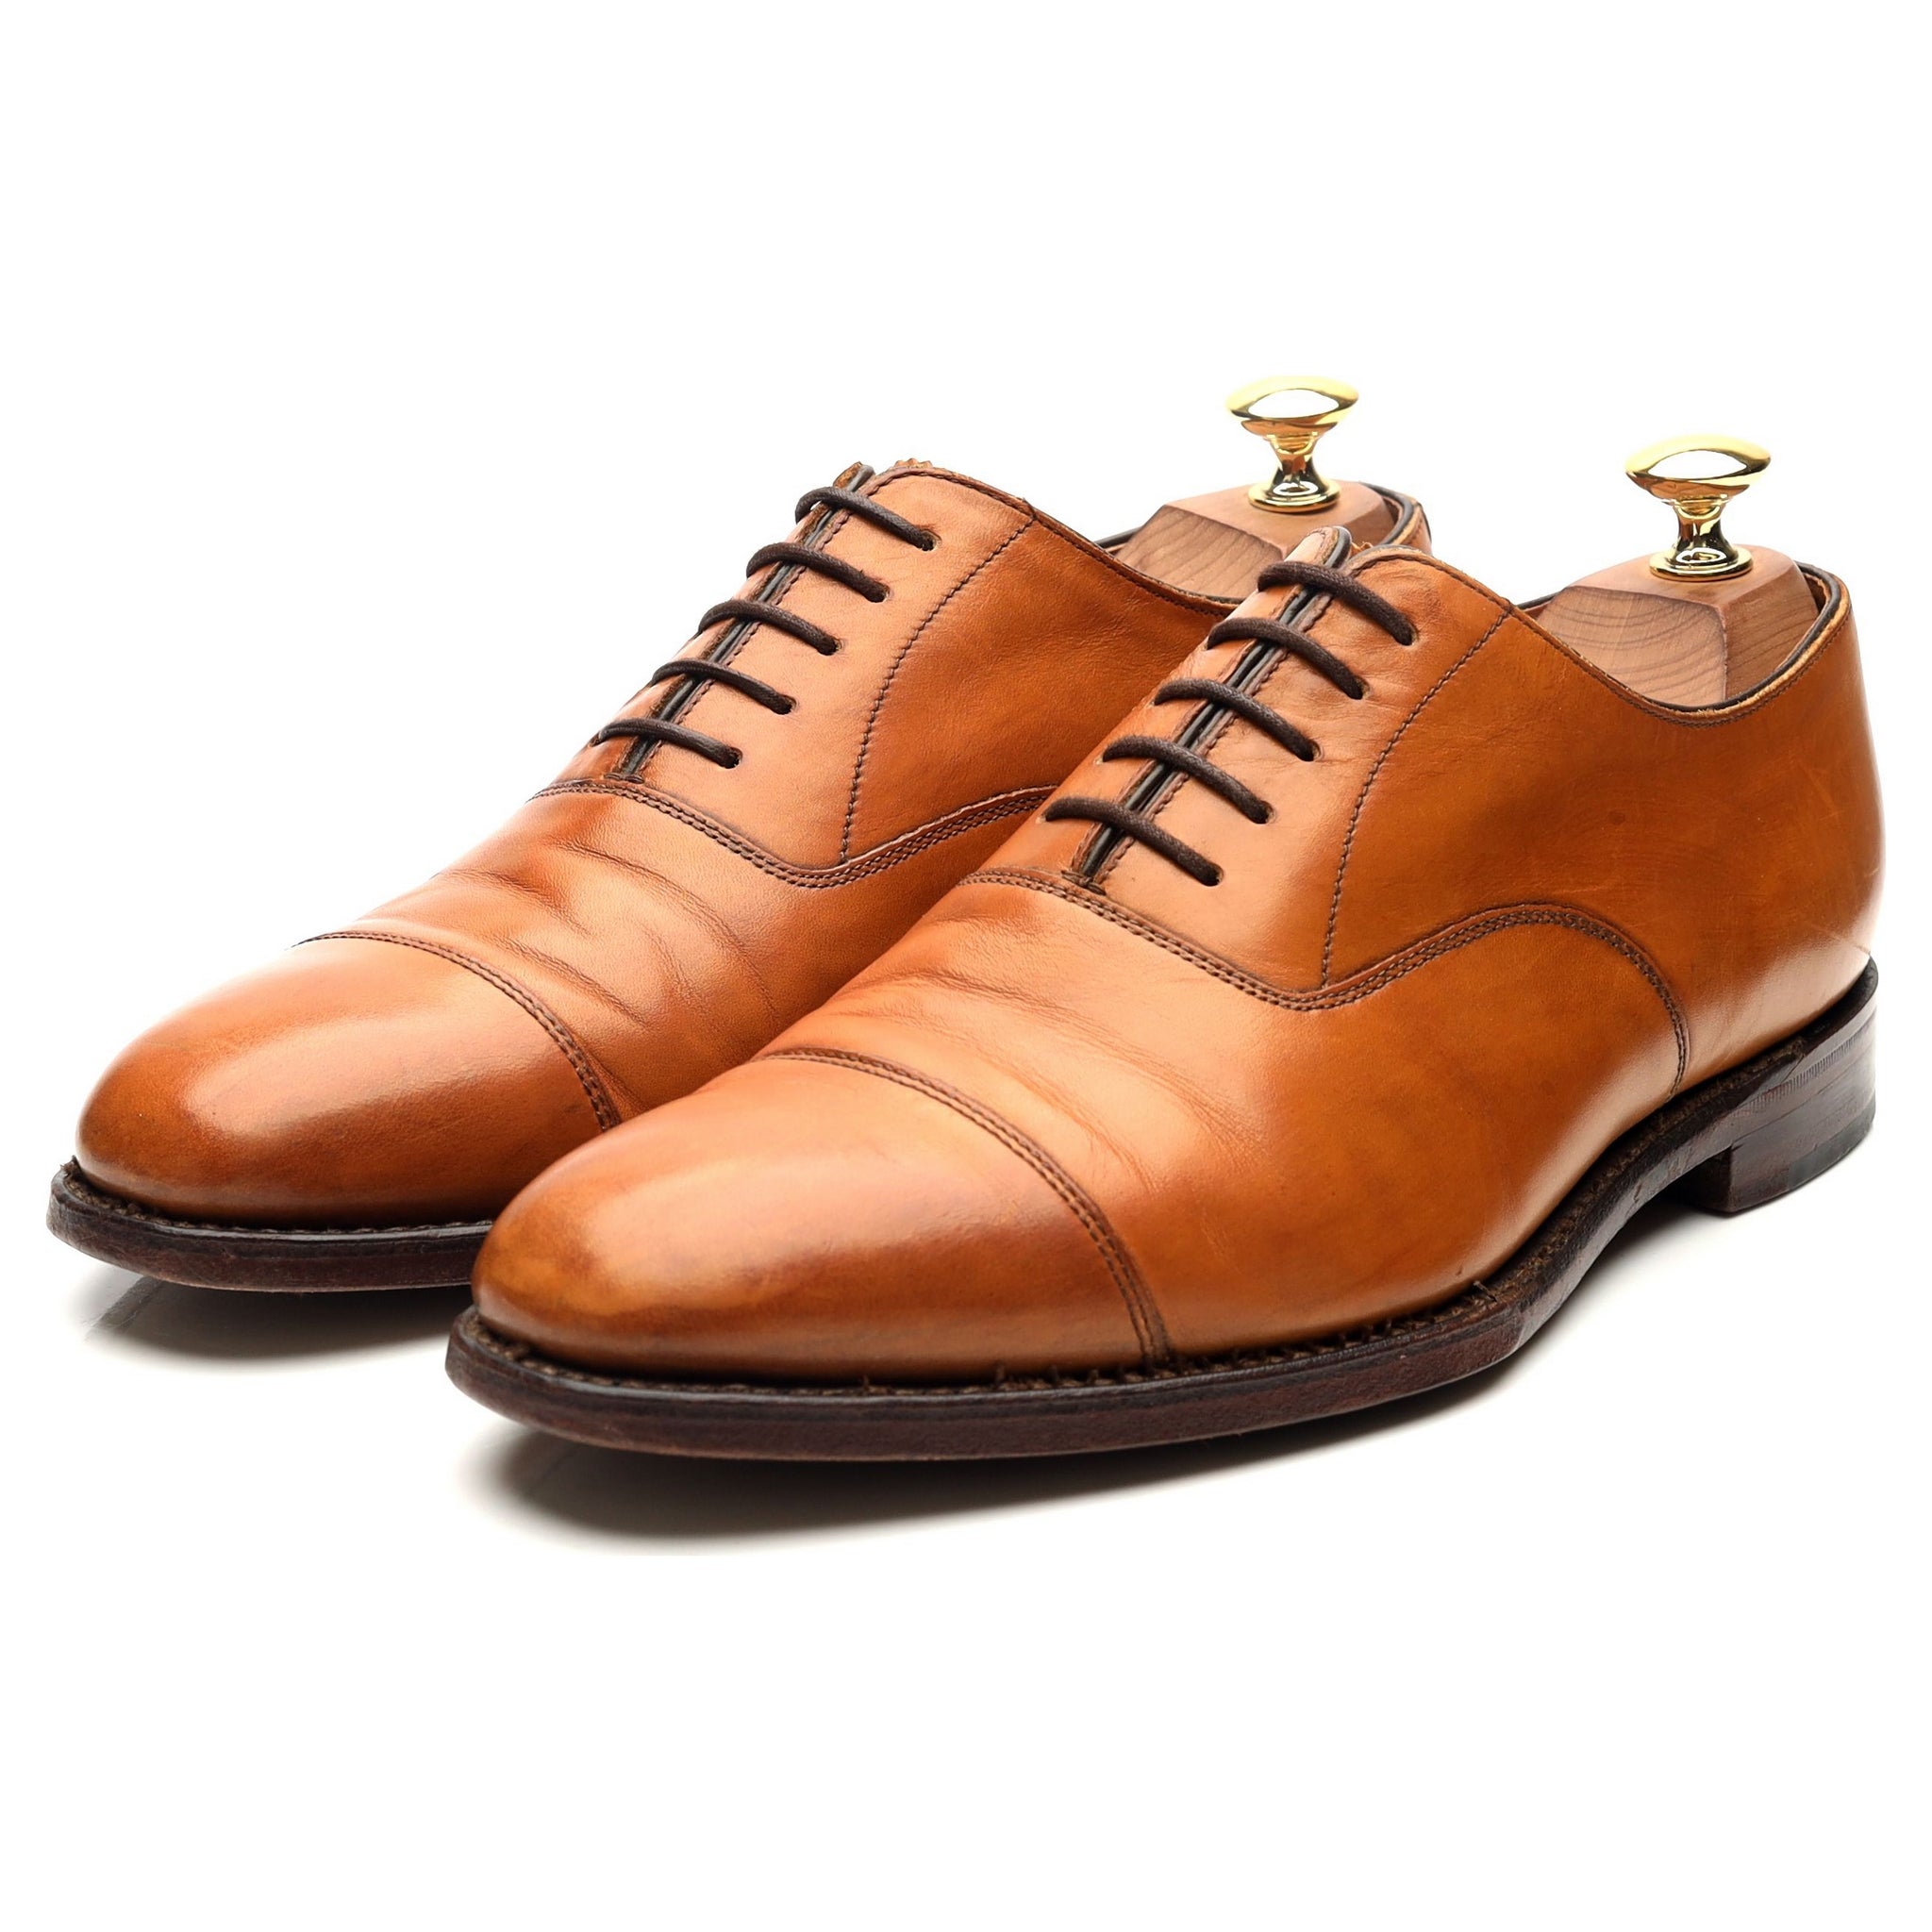 1880 'Aldwych' Tan Brown Leather Oxford UK 6.5 F - Abbot's Shoes